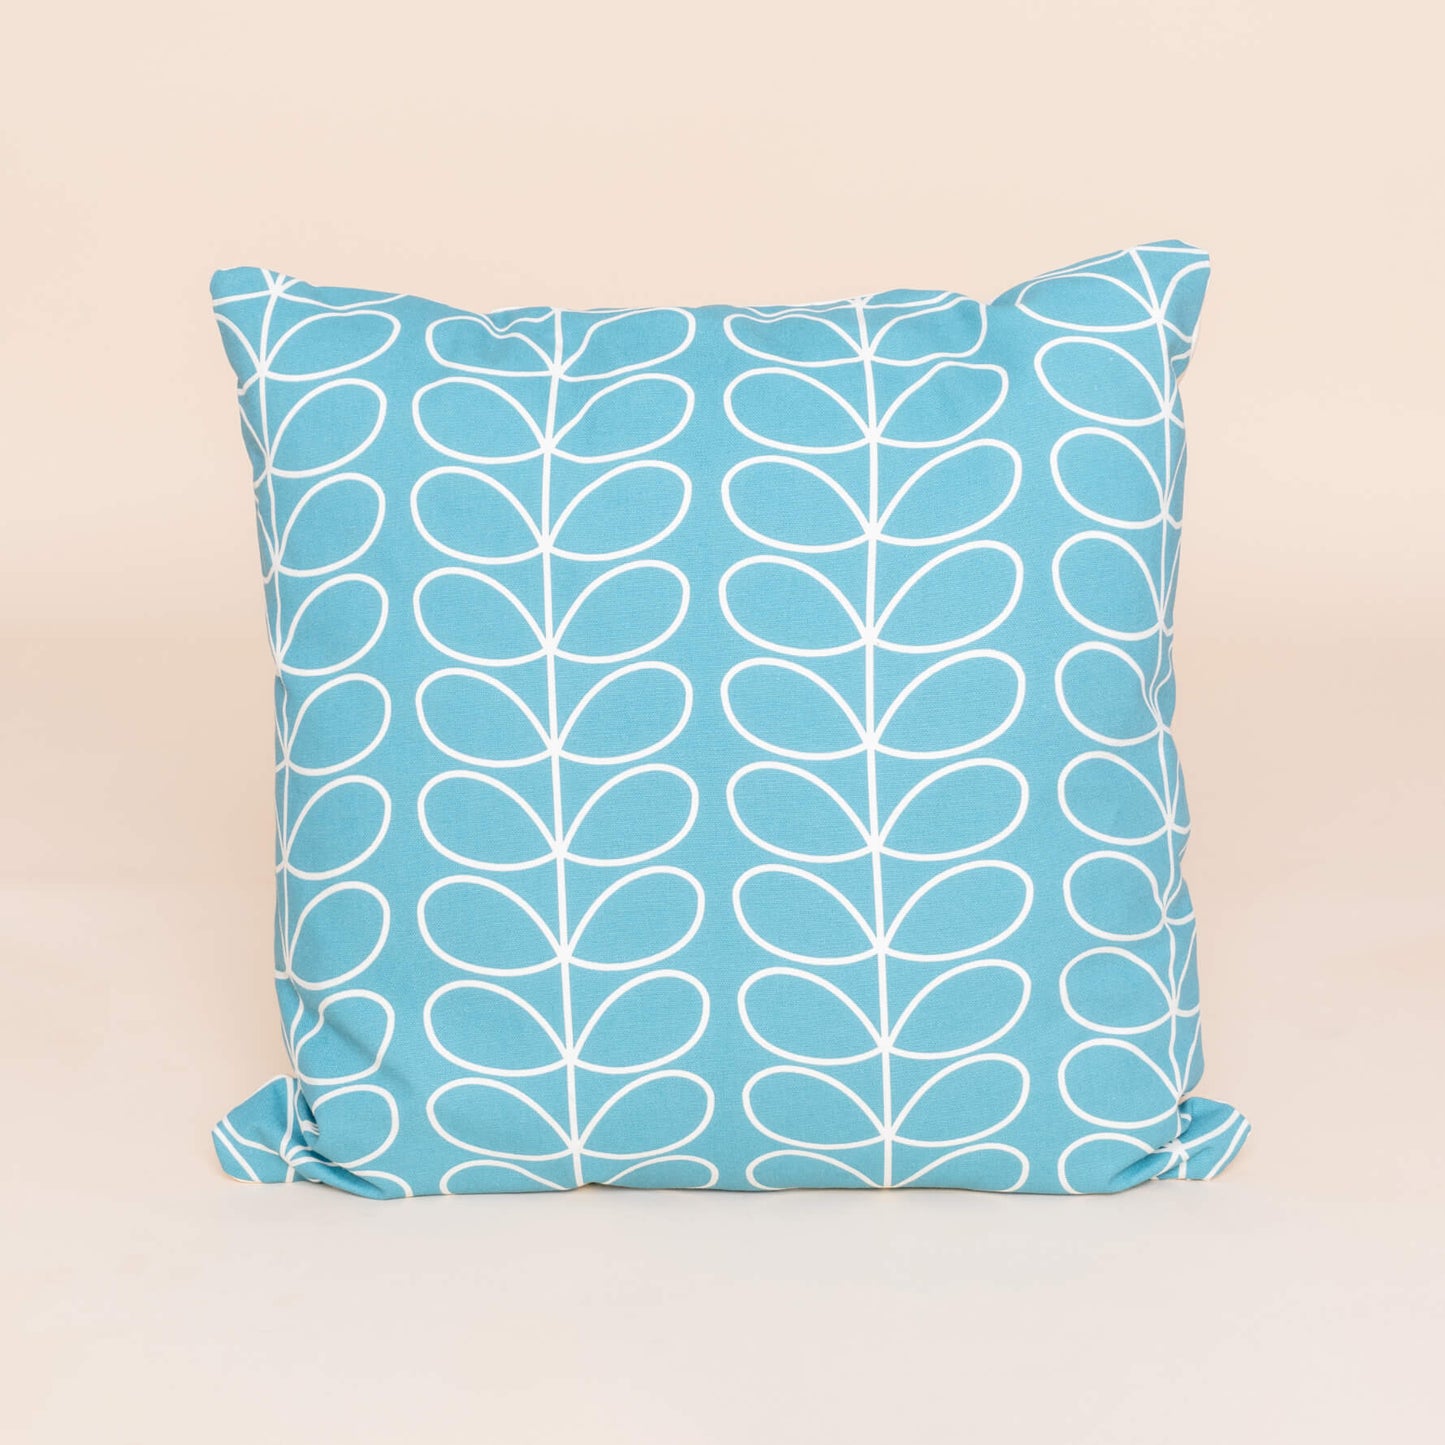 Orla Kiely Linear Stem 20x20" Cushion Covers in All Colours